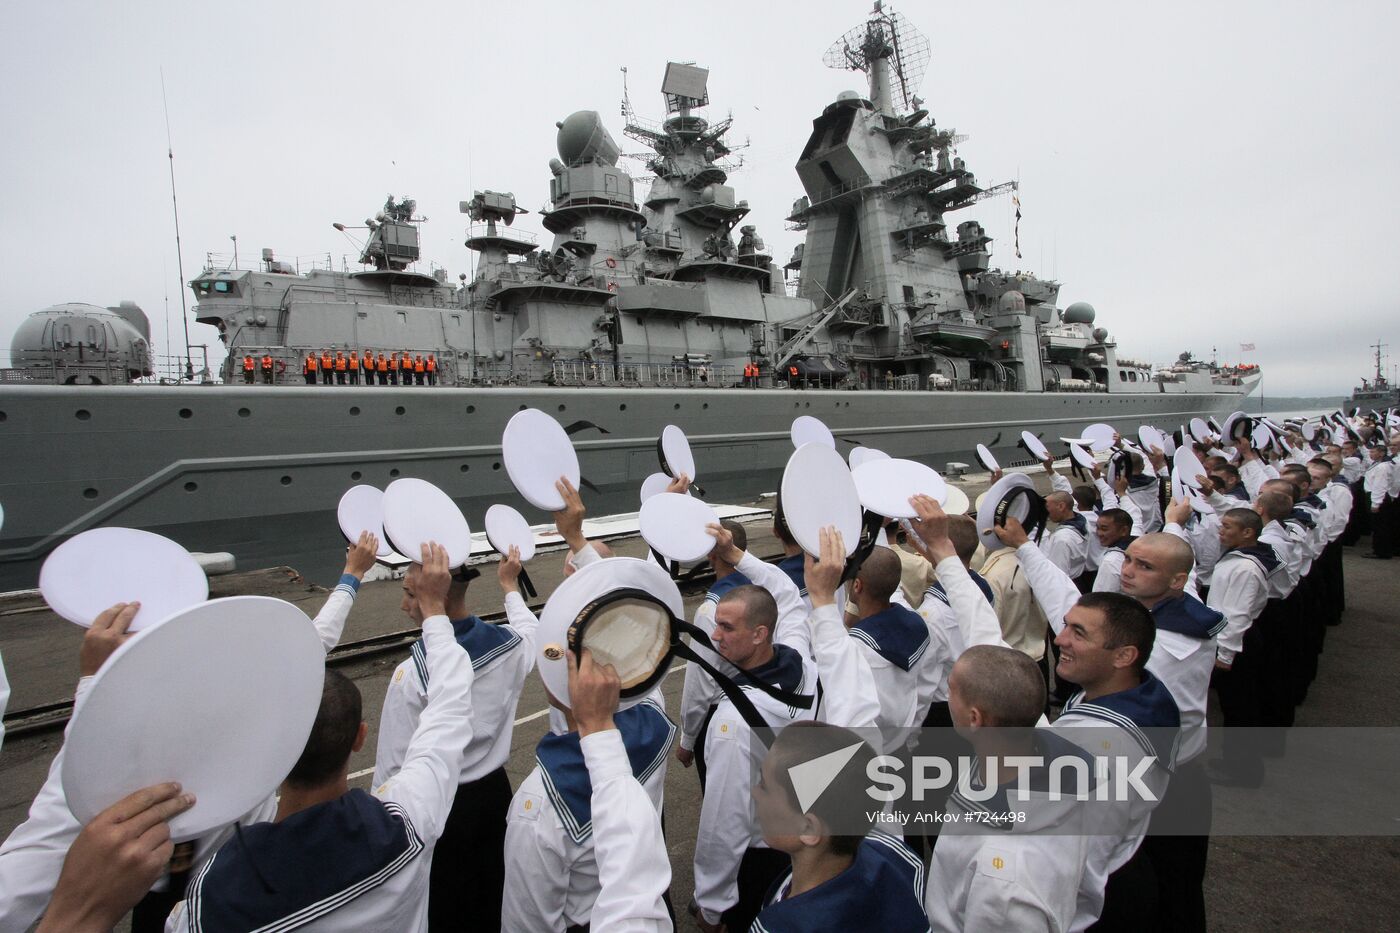 Sailors bidding farewell to the Peter the Great cruiser